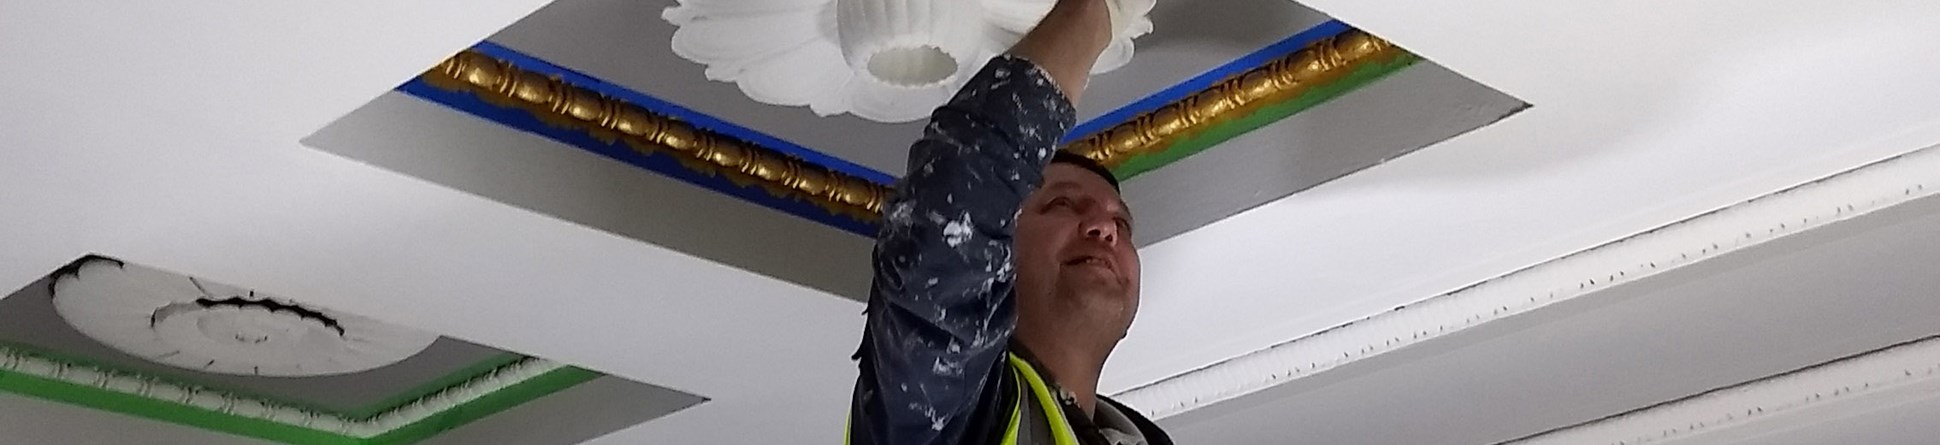 Photo of a painter touching up the ceiling using yellow paint